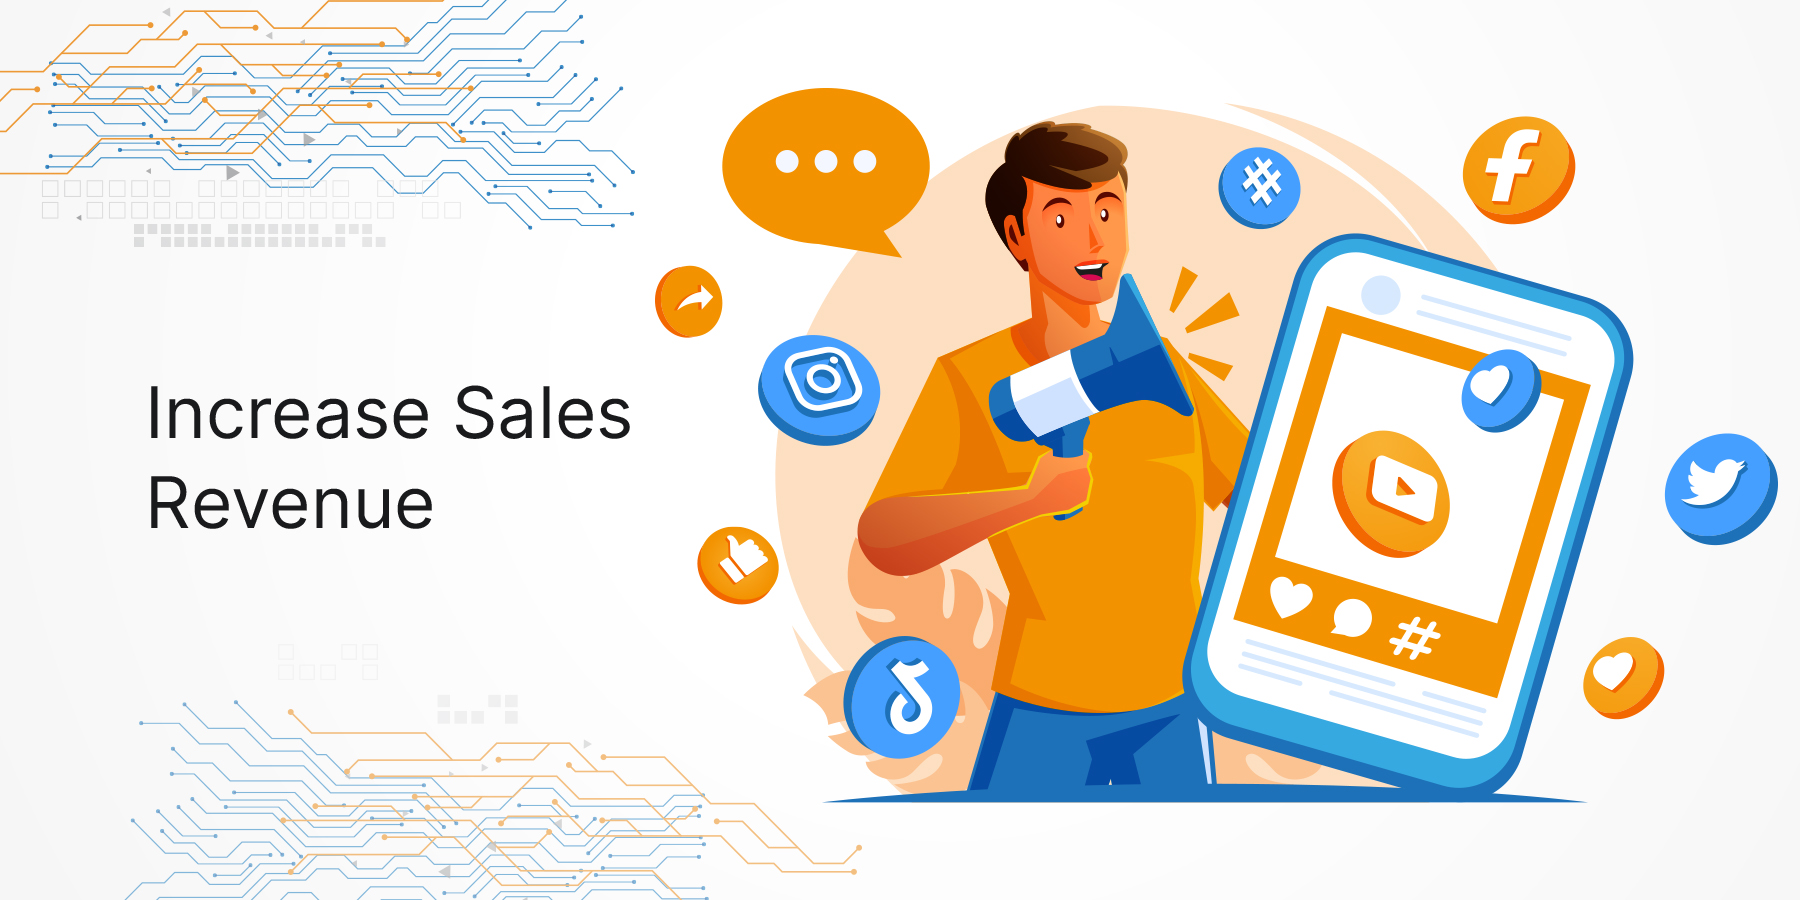 How can digital marketing help in increasing your sales revenue